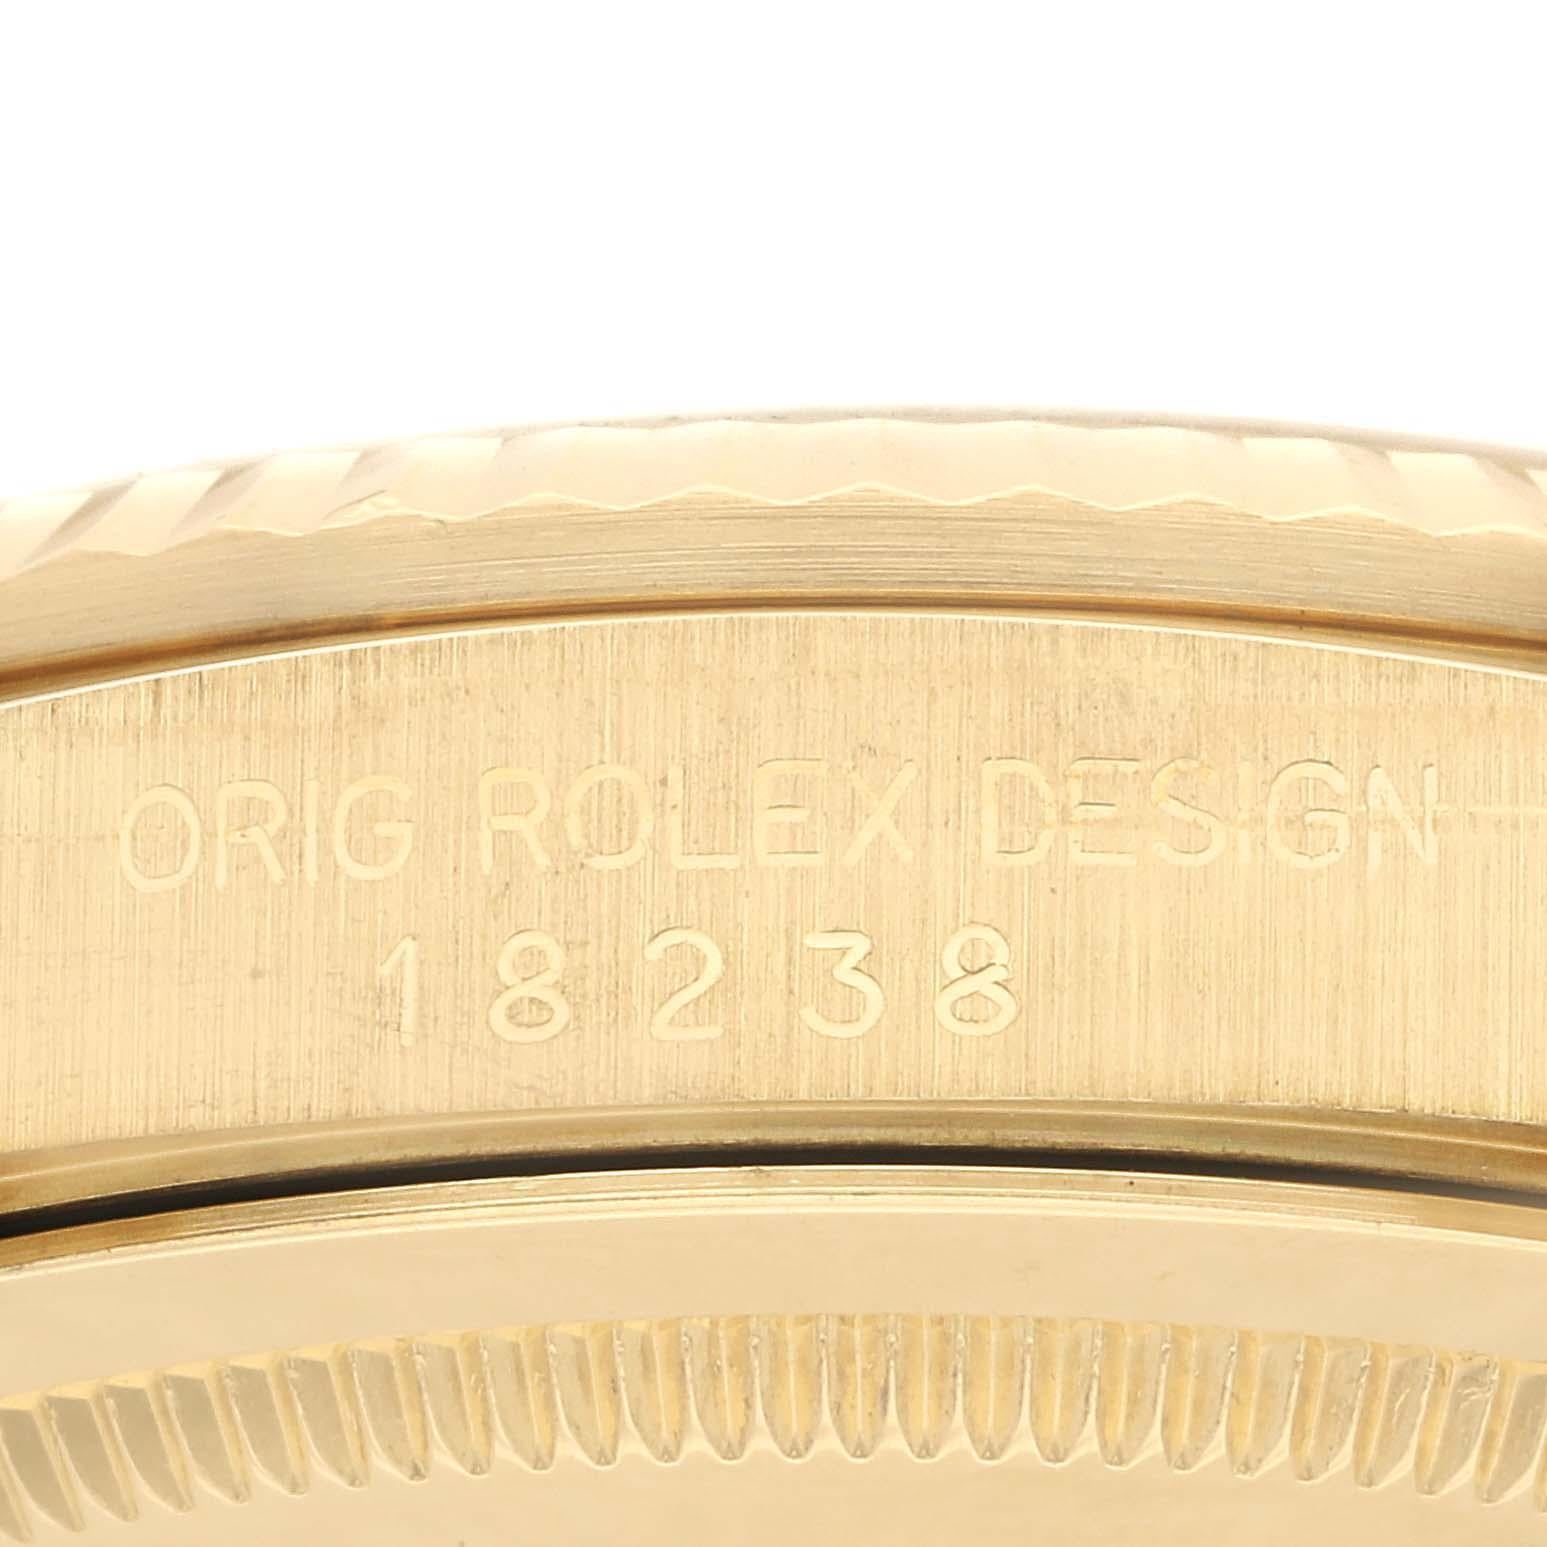 Men's Rolex President Day-Date Yellow Gold Champagne Diamond Dial Mens Watch 18238 For Sale